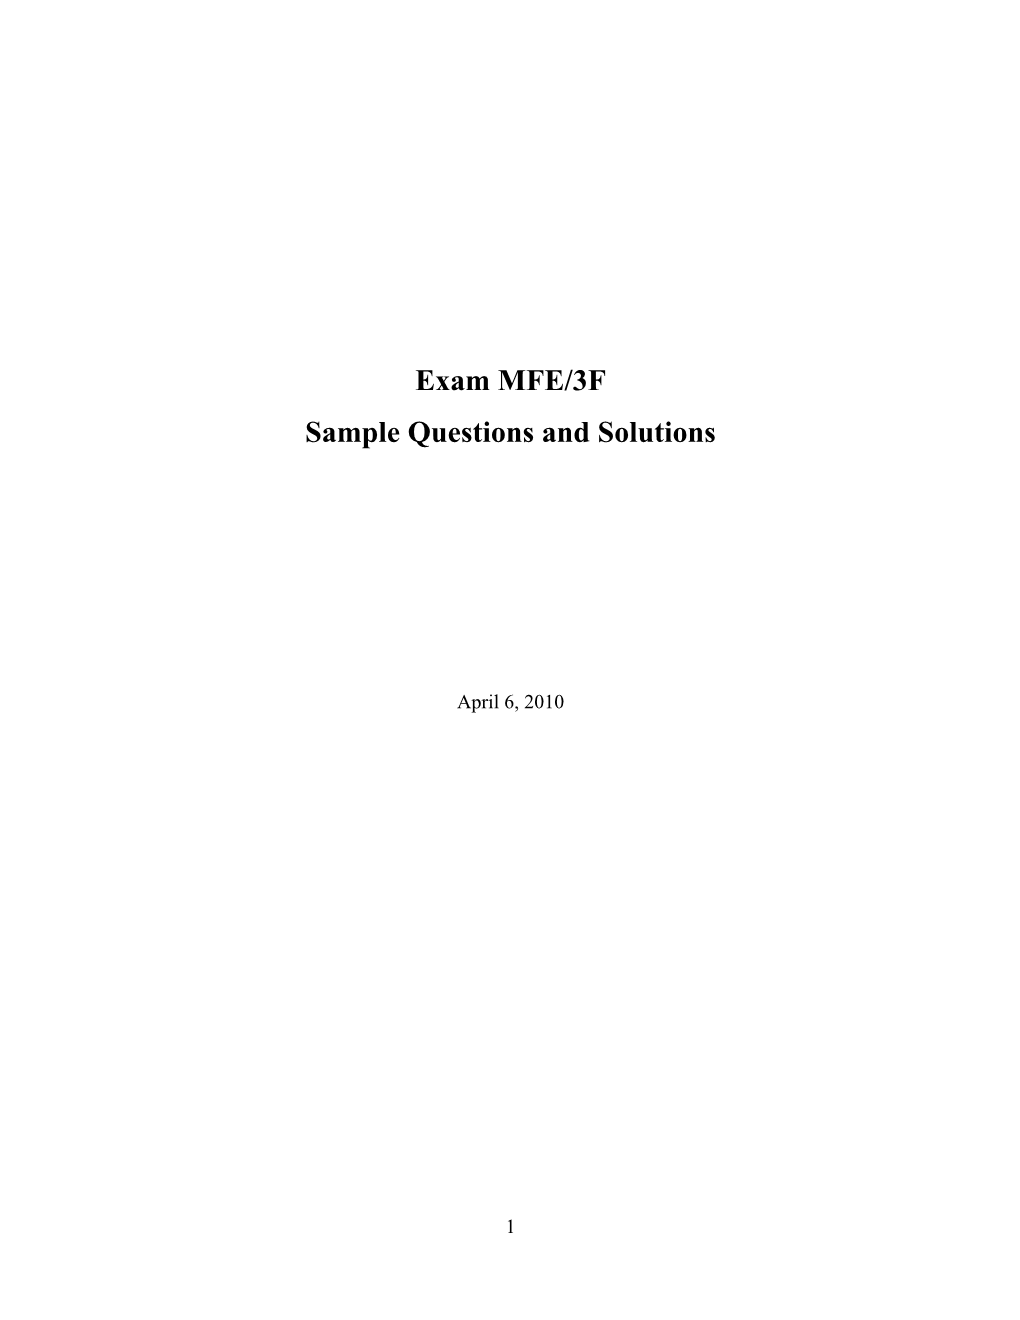 Exam MFE/3F Sample Questions and Solutions